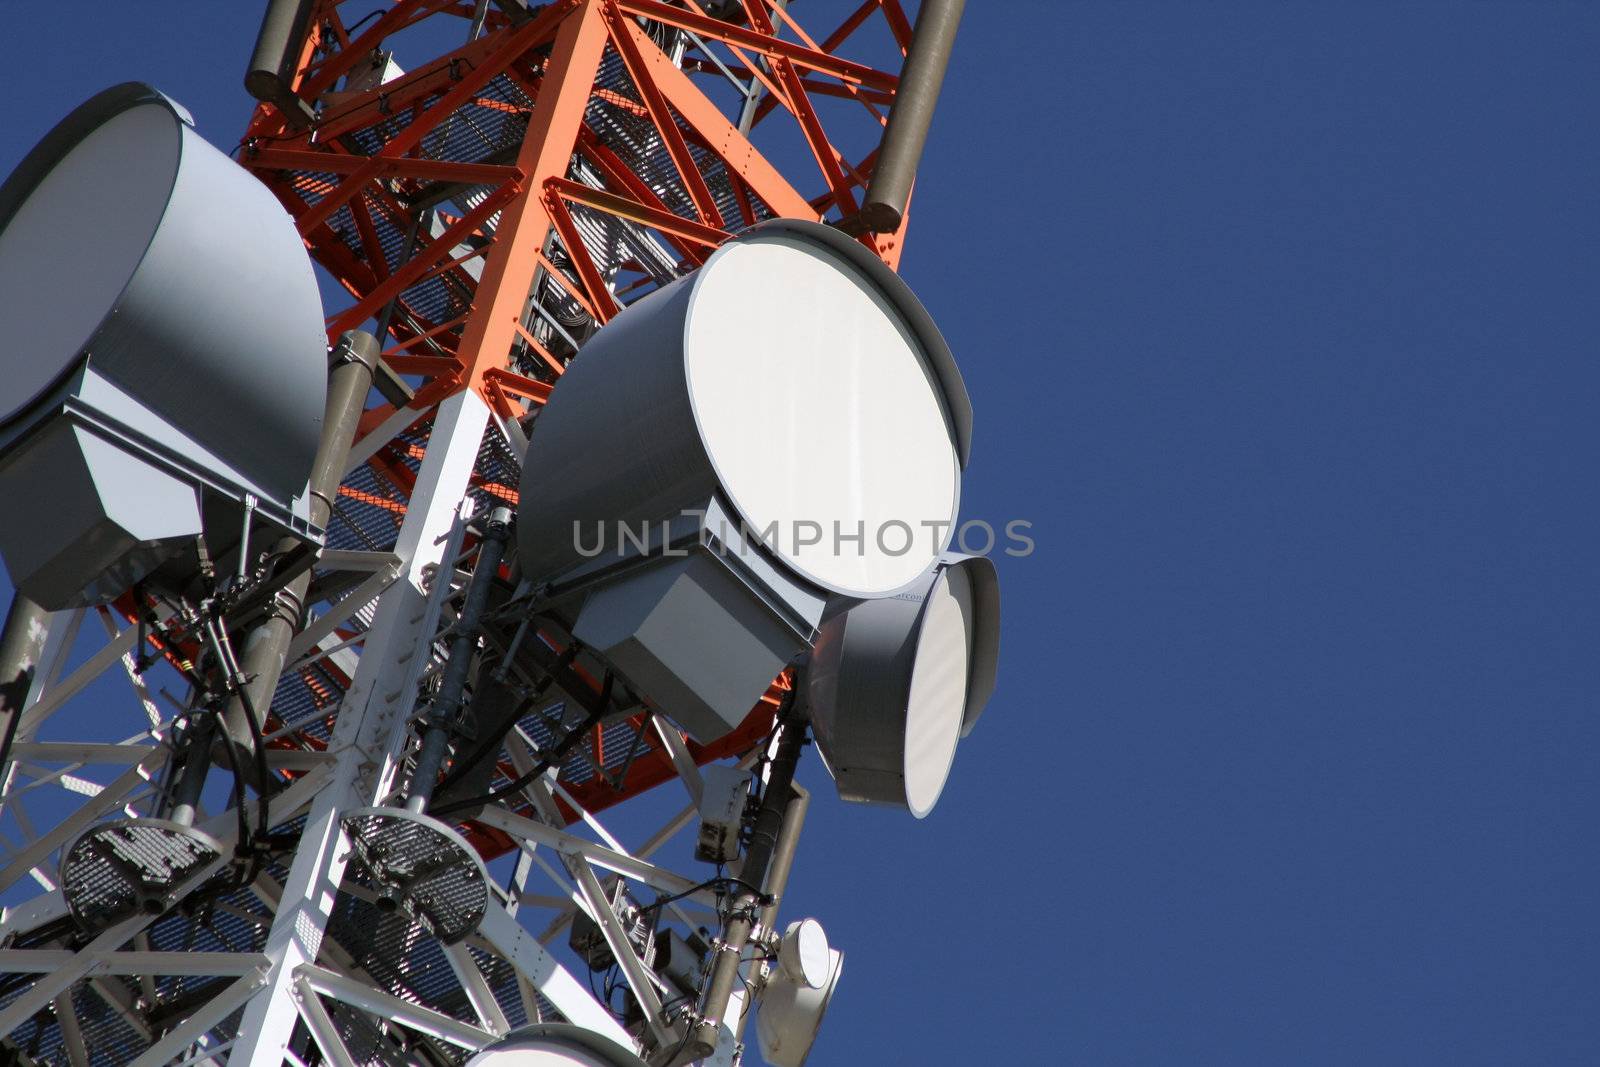 radio mast with new technology and big recievers